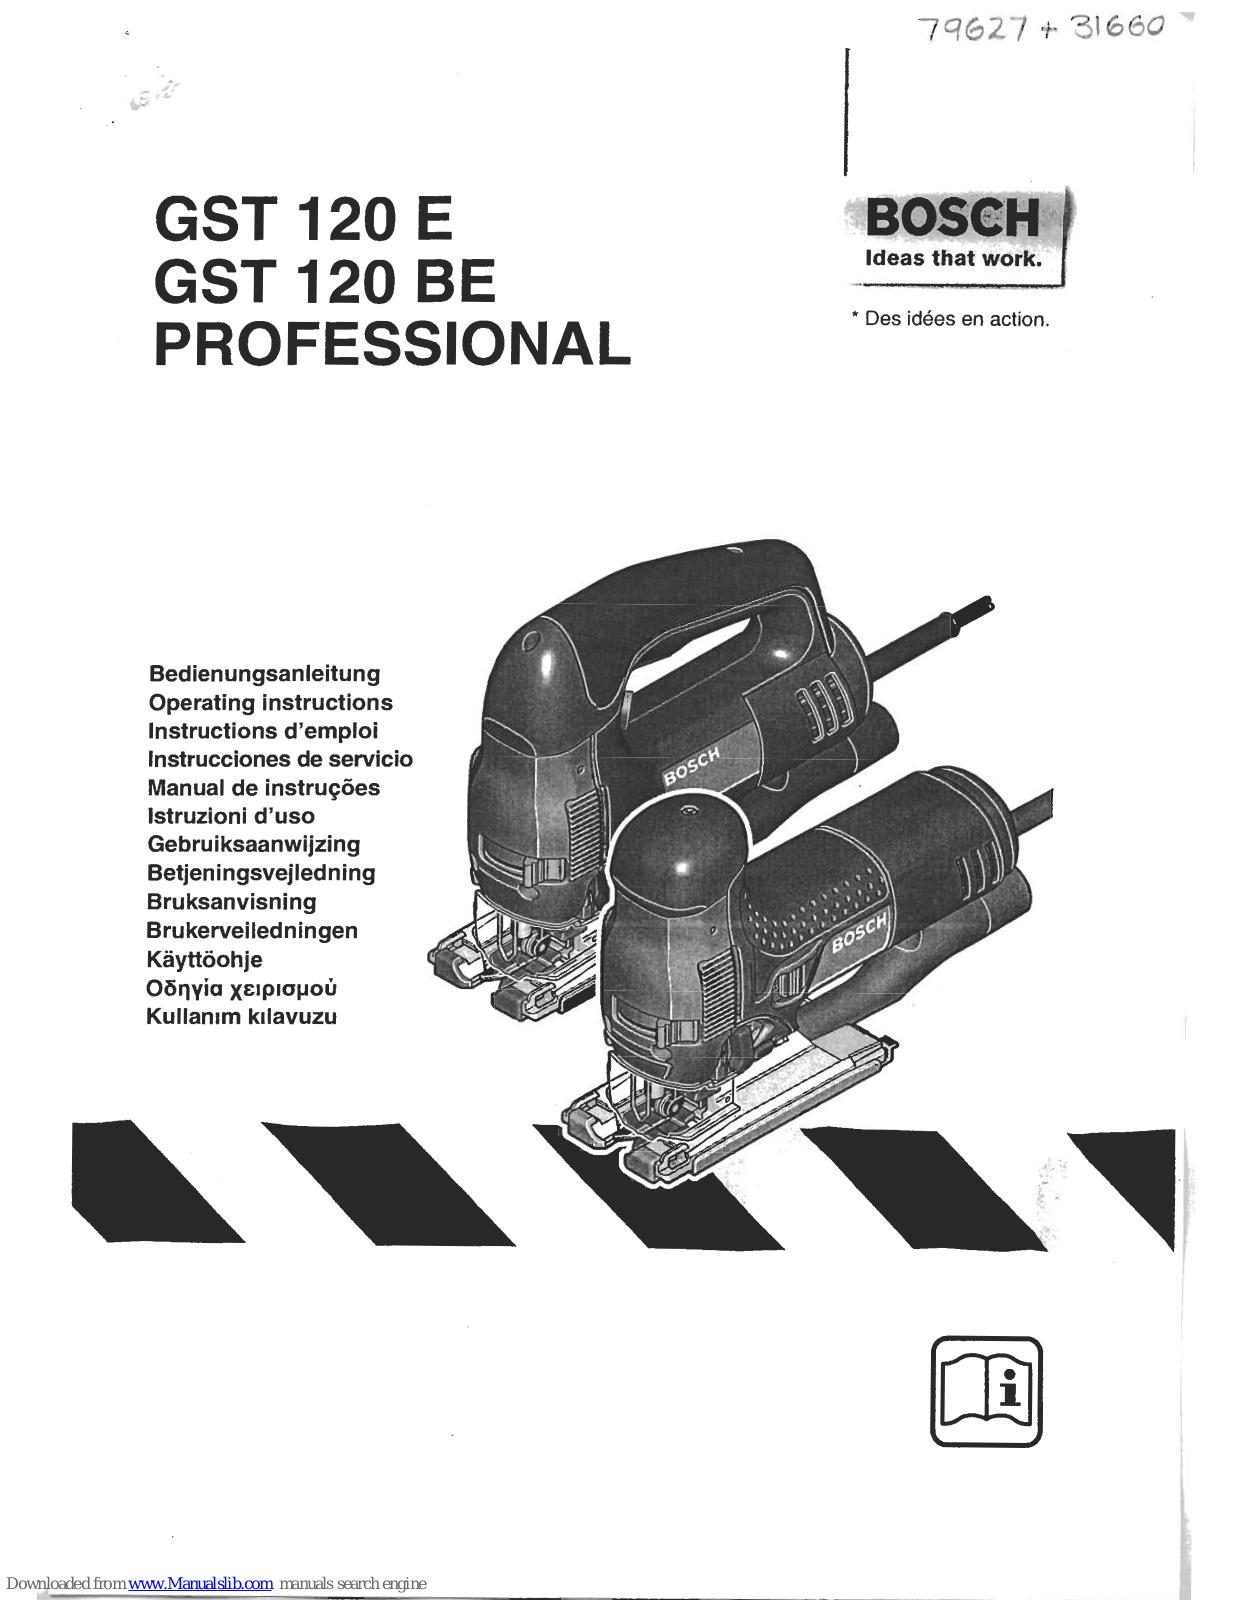 Bosch GST 120 E professional, GST 120 BE professional Operating Instructions Manual